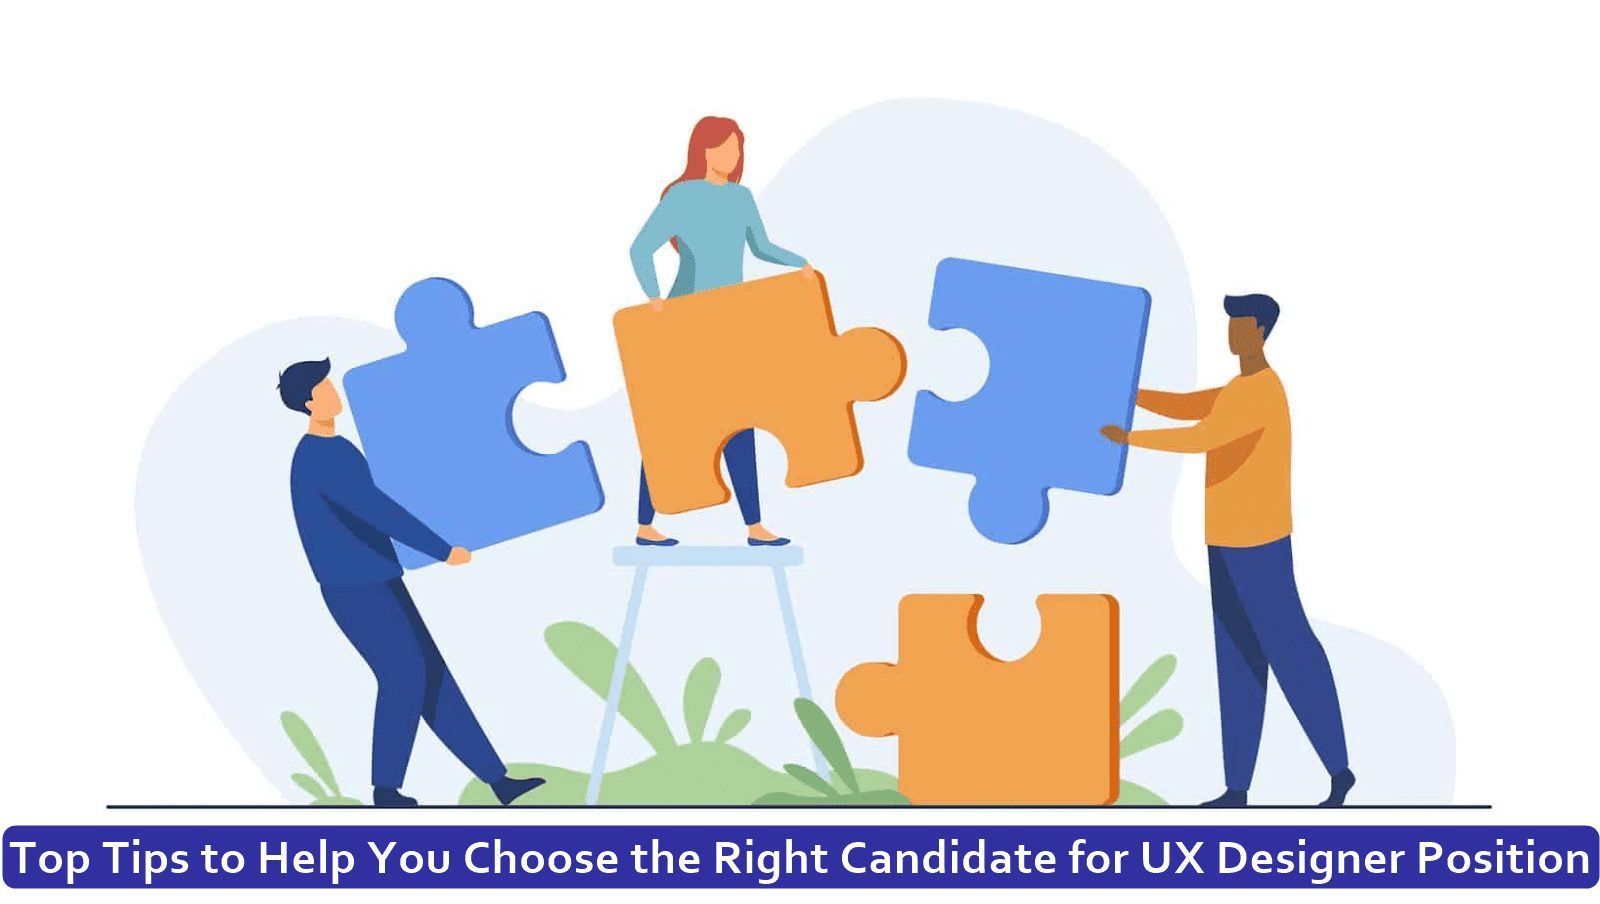 Top Tips to Help You Choose the Right Candidate for UX Designer Position